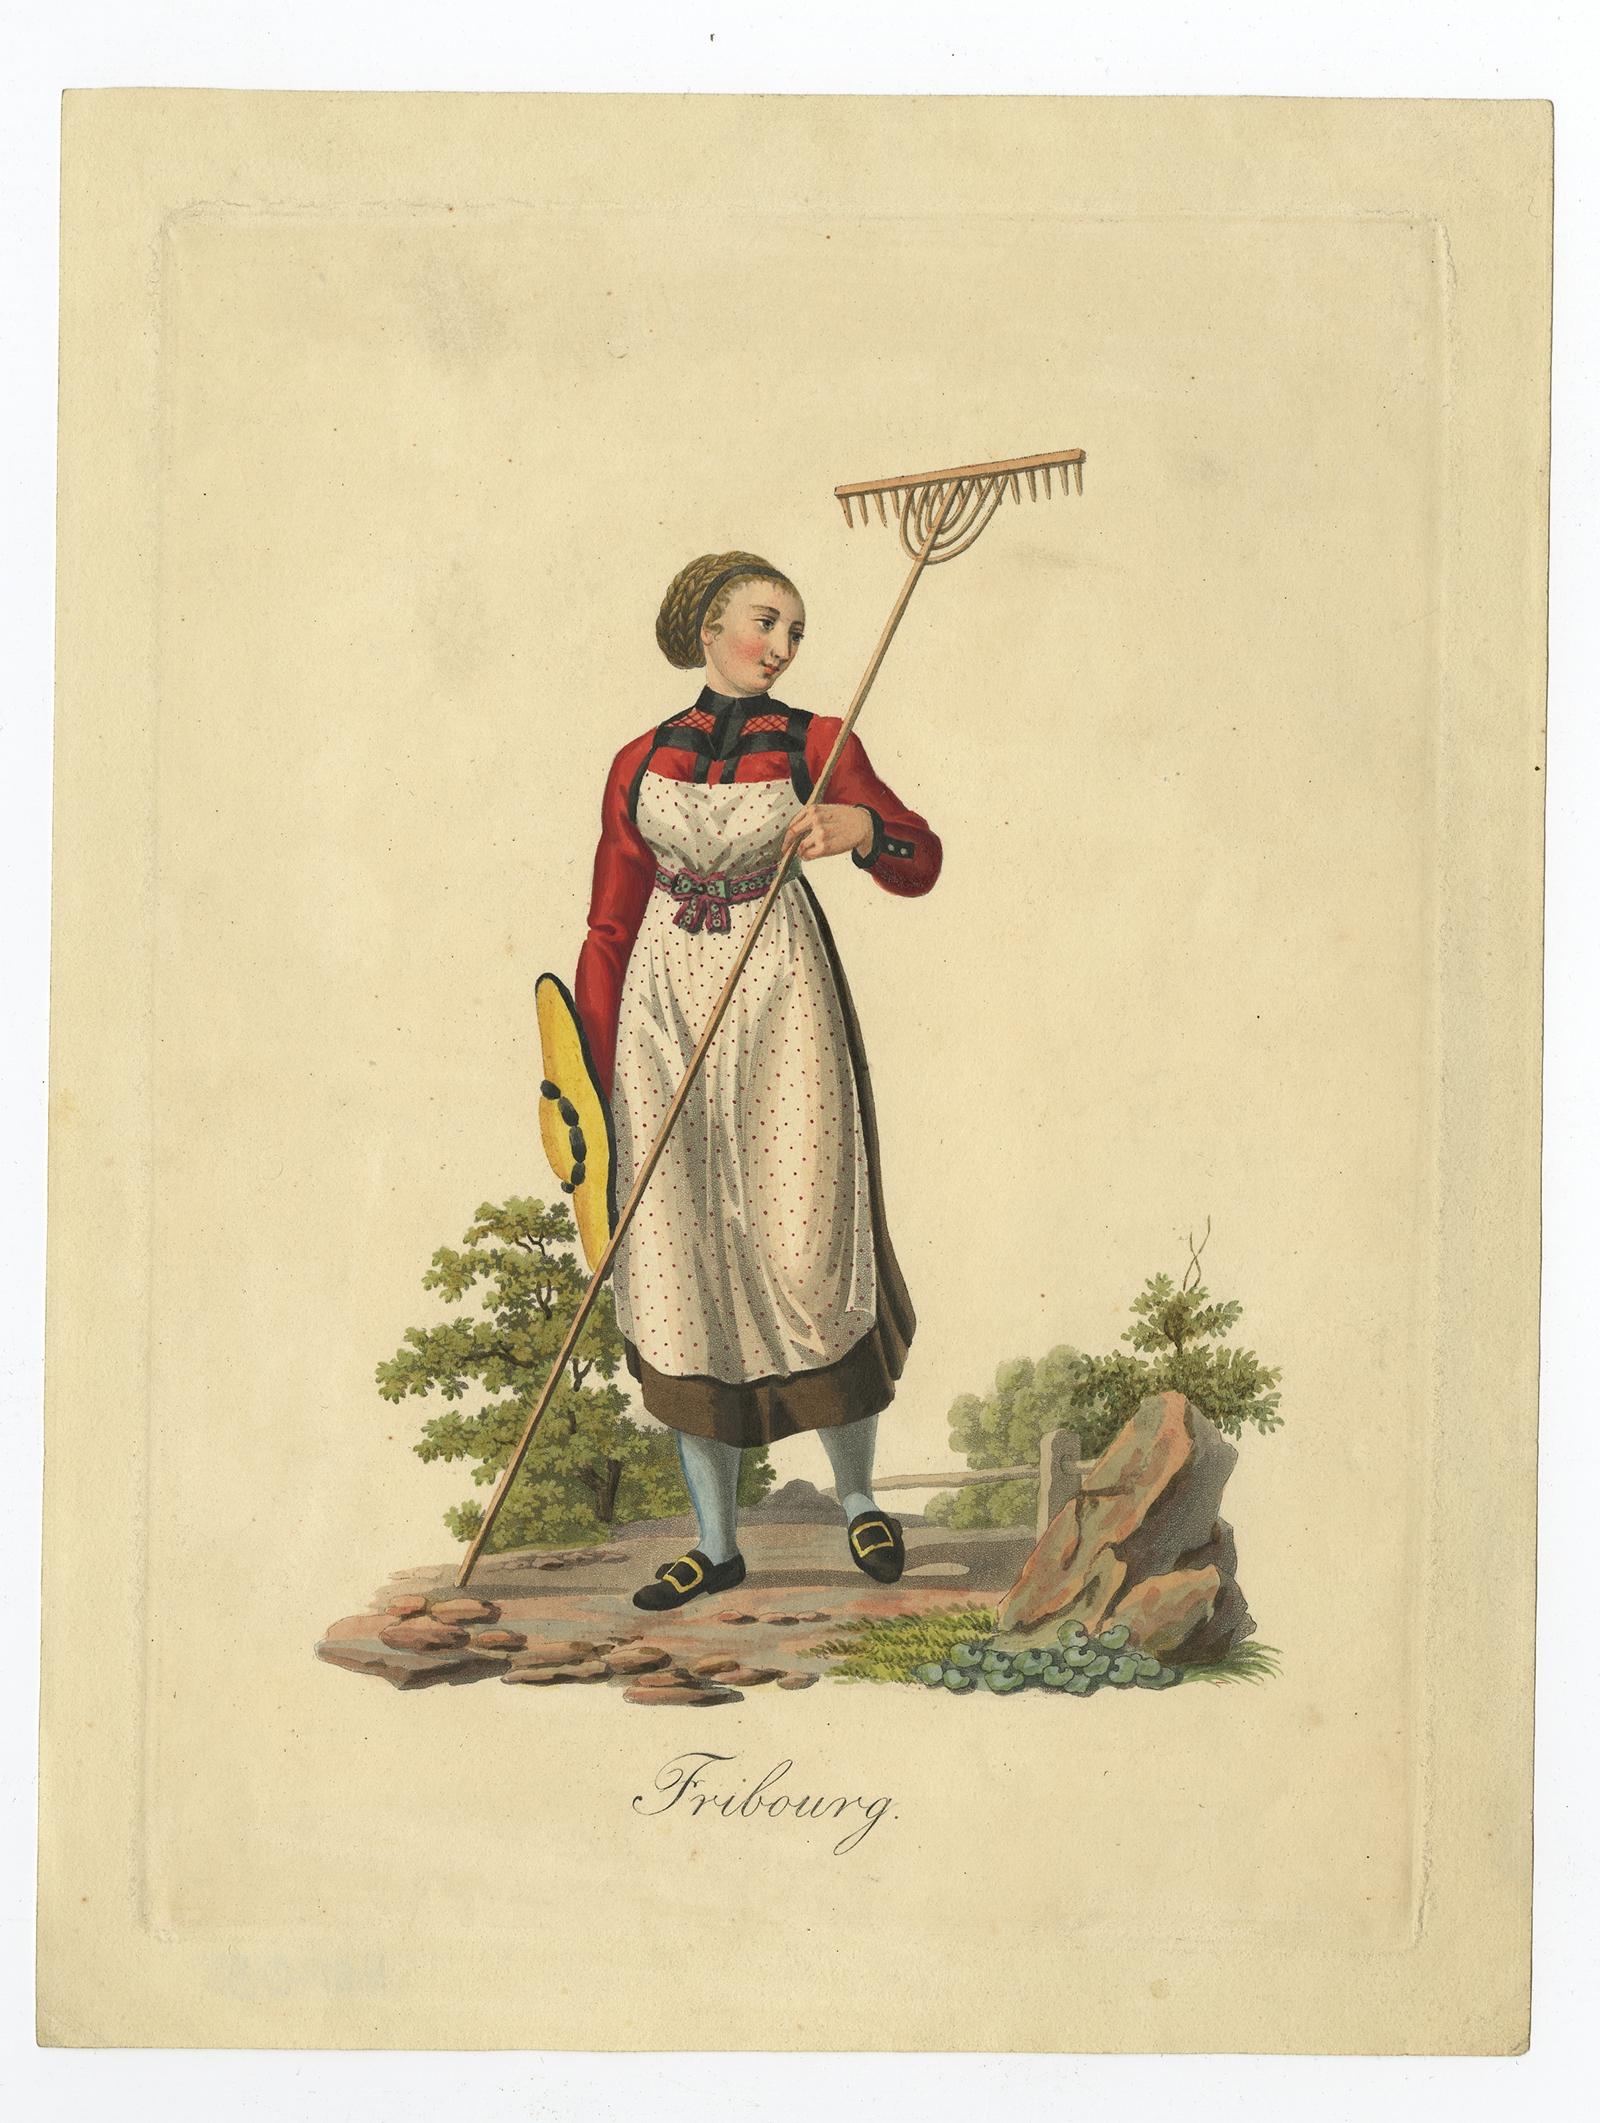 Antique costume print titled 'Fribourg'. 

This print depicts a farmer's wife from Fribourg, Switzerland. Source unknown, to be determined.

Artists and Engravers: Anonymous.